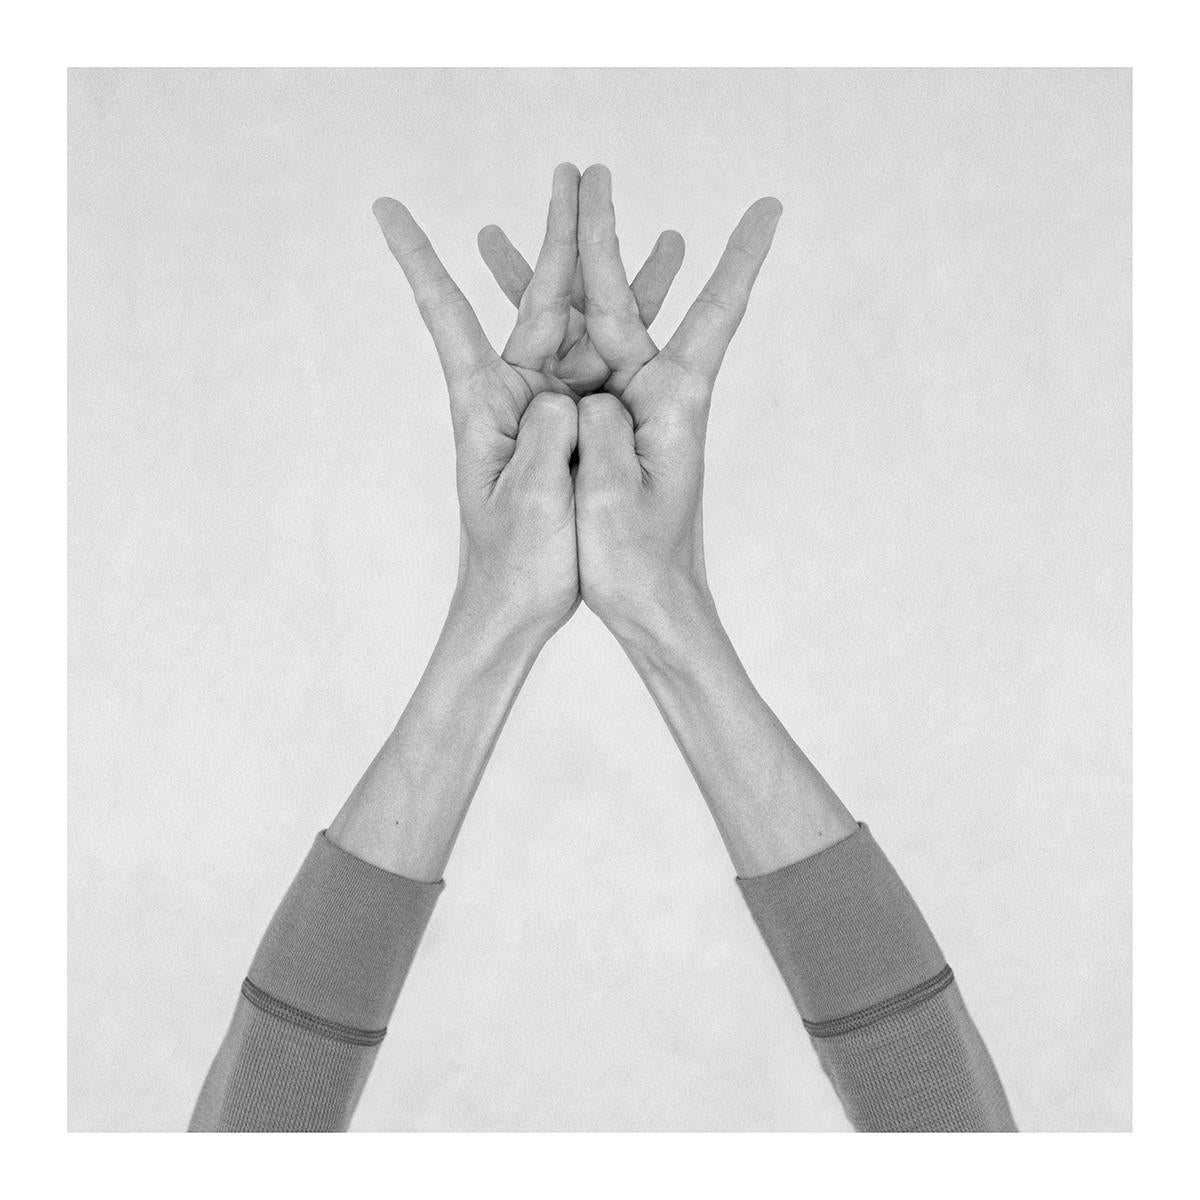 Nico Baixas / Gos-com-fuig Black and White Photograph - Untitled XXVI. From the Series Chiromorphose. Hands. Black & White Photography